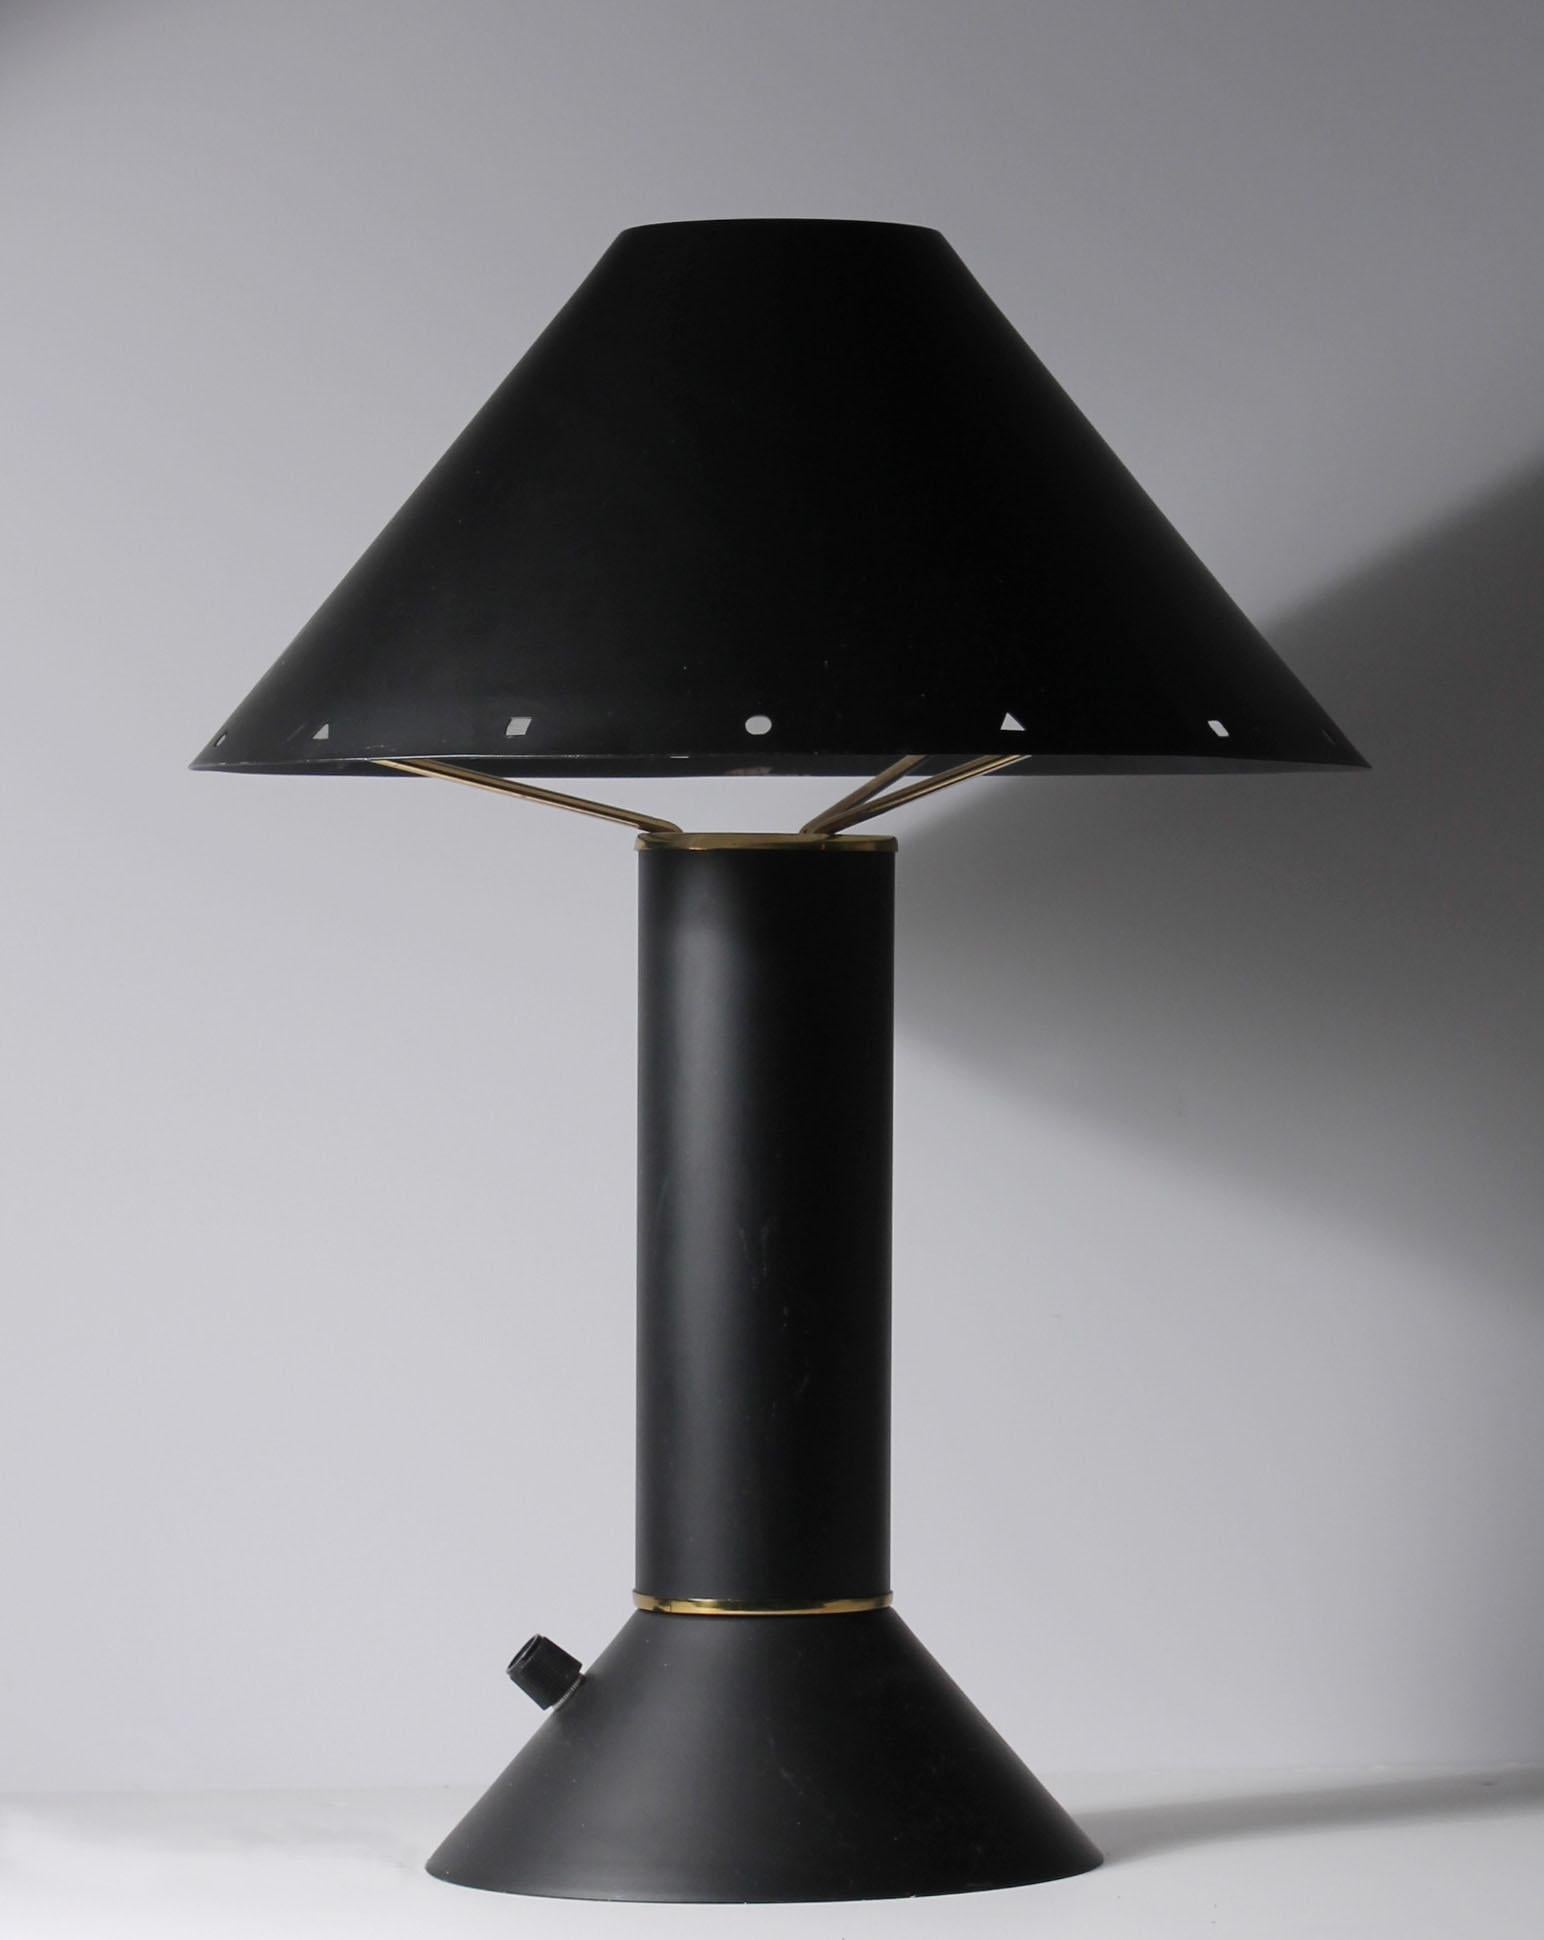 Pair of vintage Original black Ron Rezek table lamps. Original label attached on underside. This lamp form scarcely seen in black. Possibly a smaller production or custom.

Some light wear to the black finish. Please contact for details.